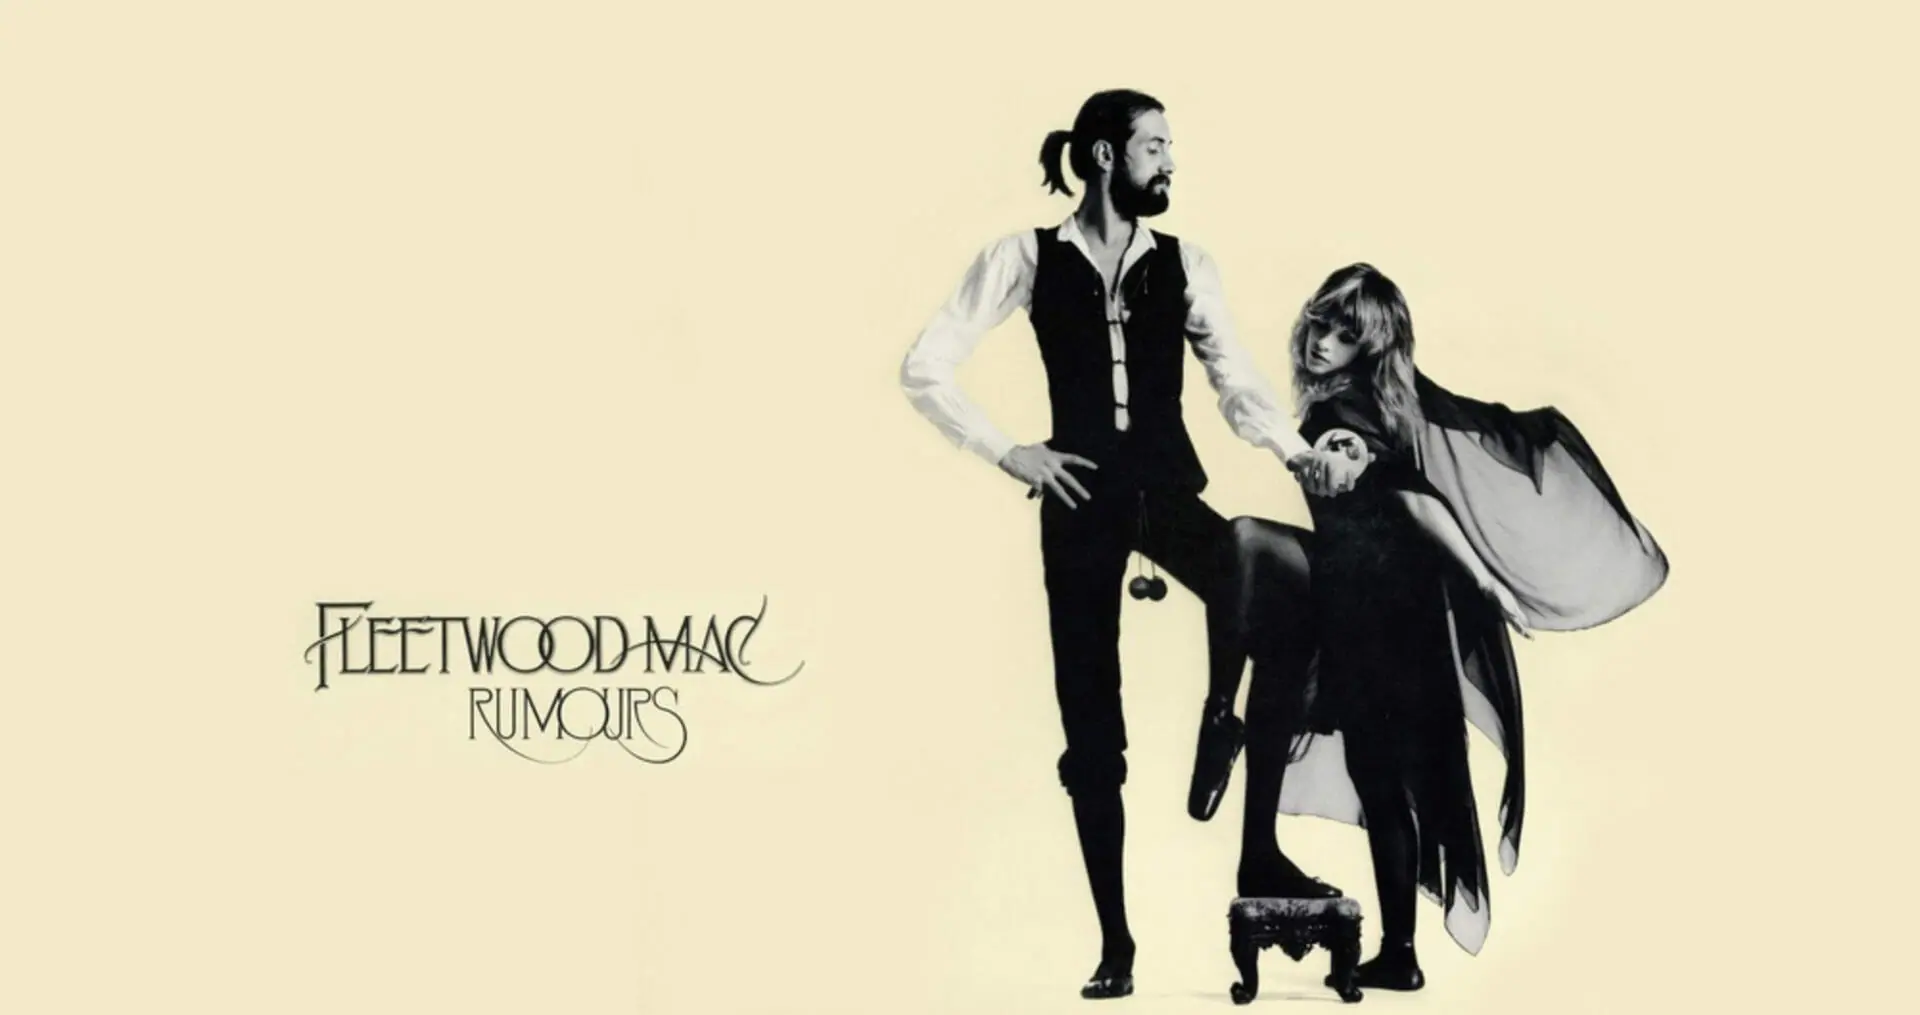 Wooden Balls From Fleetwood Macs Rumours Album Cover Auctioned For  128000